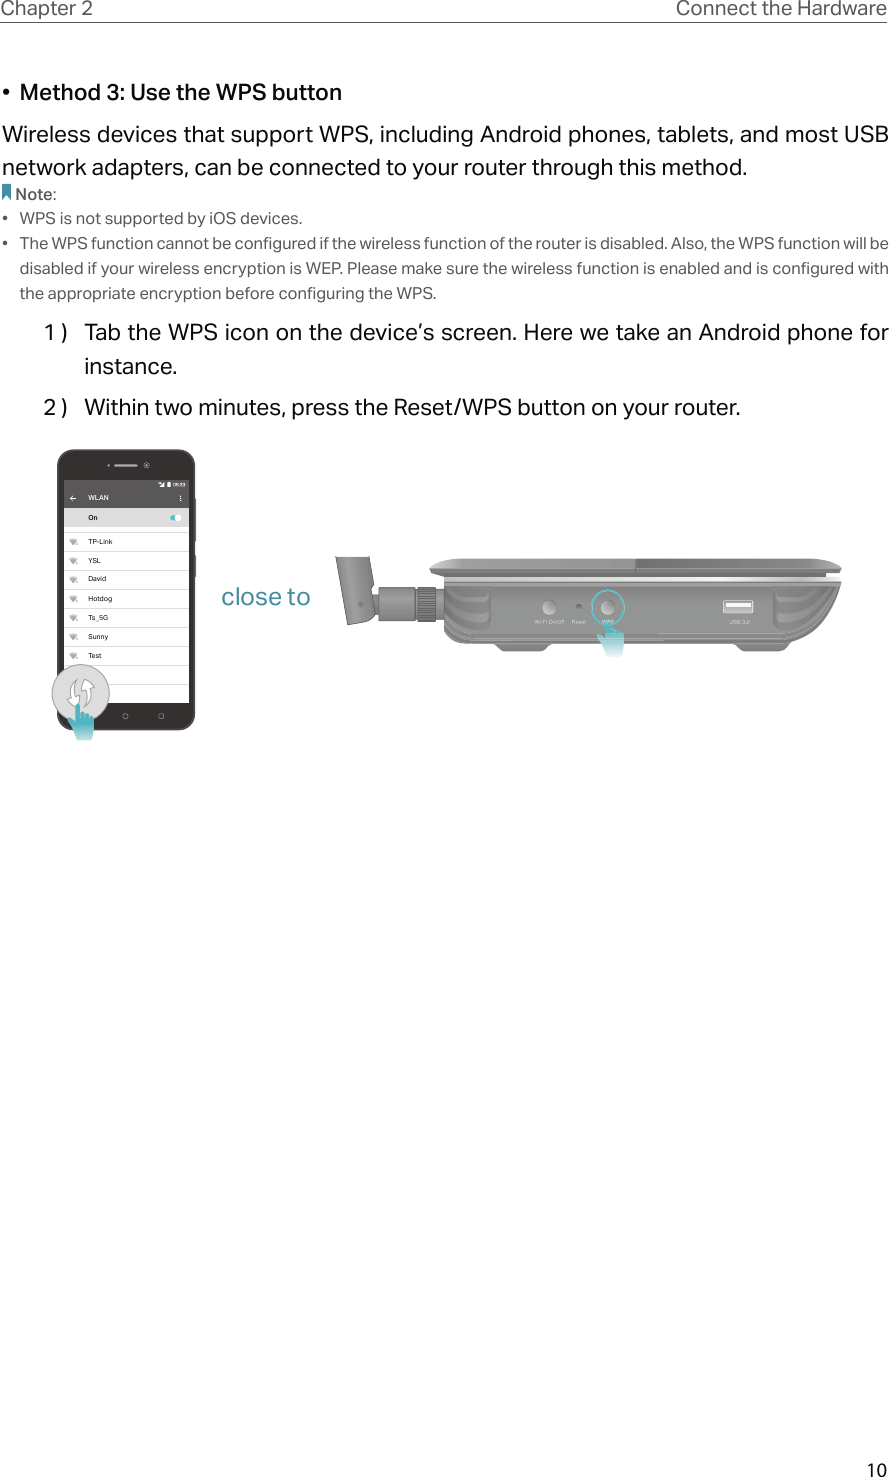 10Chapter 2 Connect the Hardware•  Method 3: Use the WPS buttonWireless devices that support WPS, including Android phones, tablets, and most USB network adapters, can be connected to your router through this method.Note:•  WPS is not supported by iOS devices.•  The WPS function cannot be configured if the wireless function of the router is disabled. Also, the WPS function will be disabled if your wireless encryption is WEP. Please make sure the wireless function is enabled and is configured with the appropriate encryption before configuring the WPS.1 )  Tab the WPS icon on the device’s screen. Here we take an Android phone for instance.2 )  Within two minutes, press the Reset/WPS button on your router. WLANOnTP-LinkYSLDavidHotdogTs_5GSunnyTestclose to